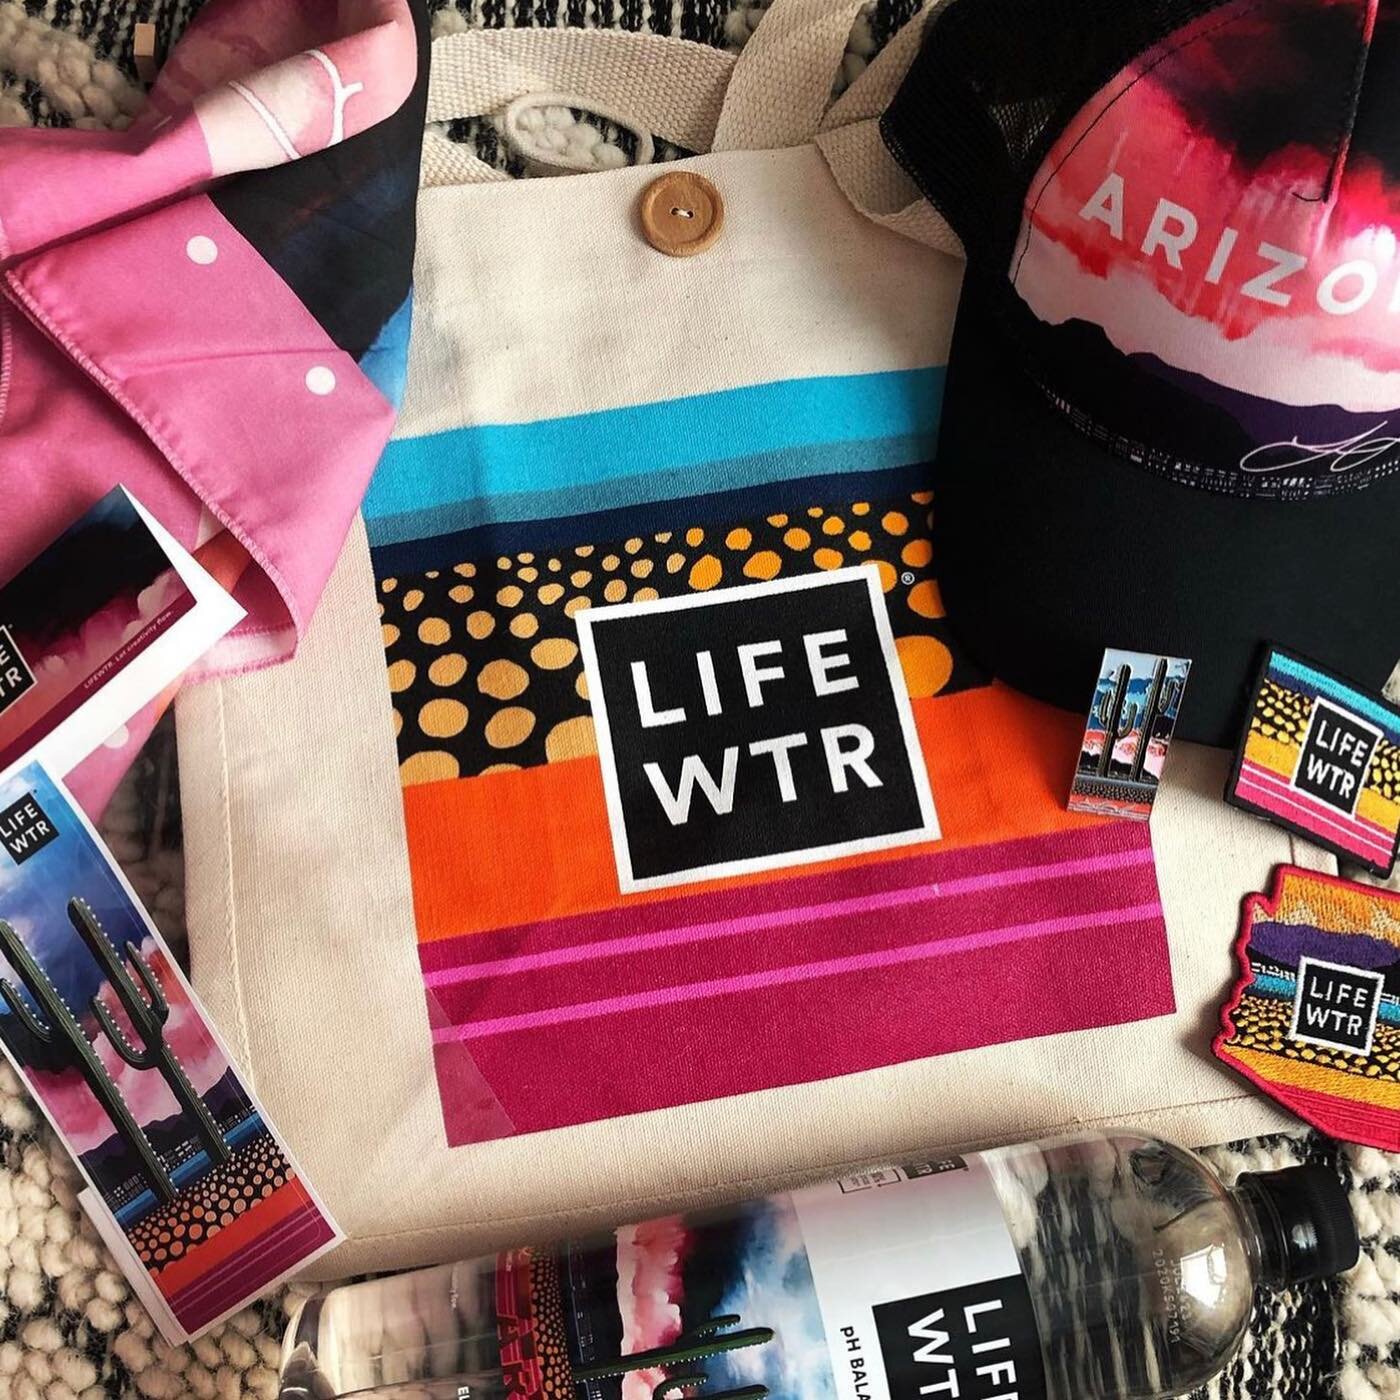 So excited to share with you an opportunity for you to scoop up an amazing art package created by @LIFEWTR to celebrate the launch of the ARIZONA bottle, where I was chosen to represent Arizona in a painting 🌵🌾 I will be dropping these kits off at 